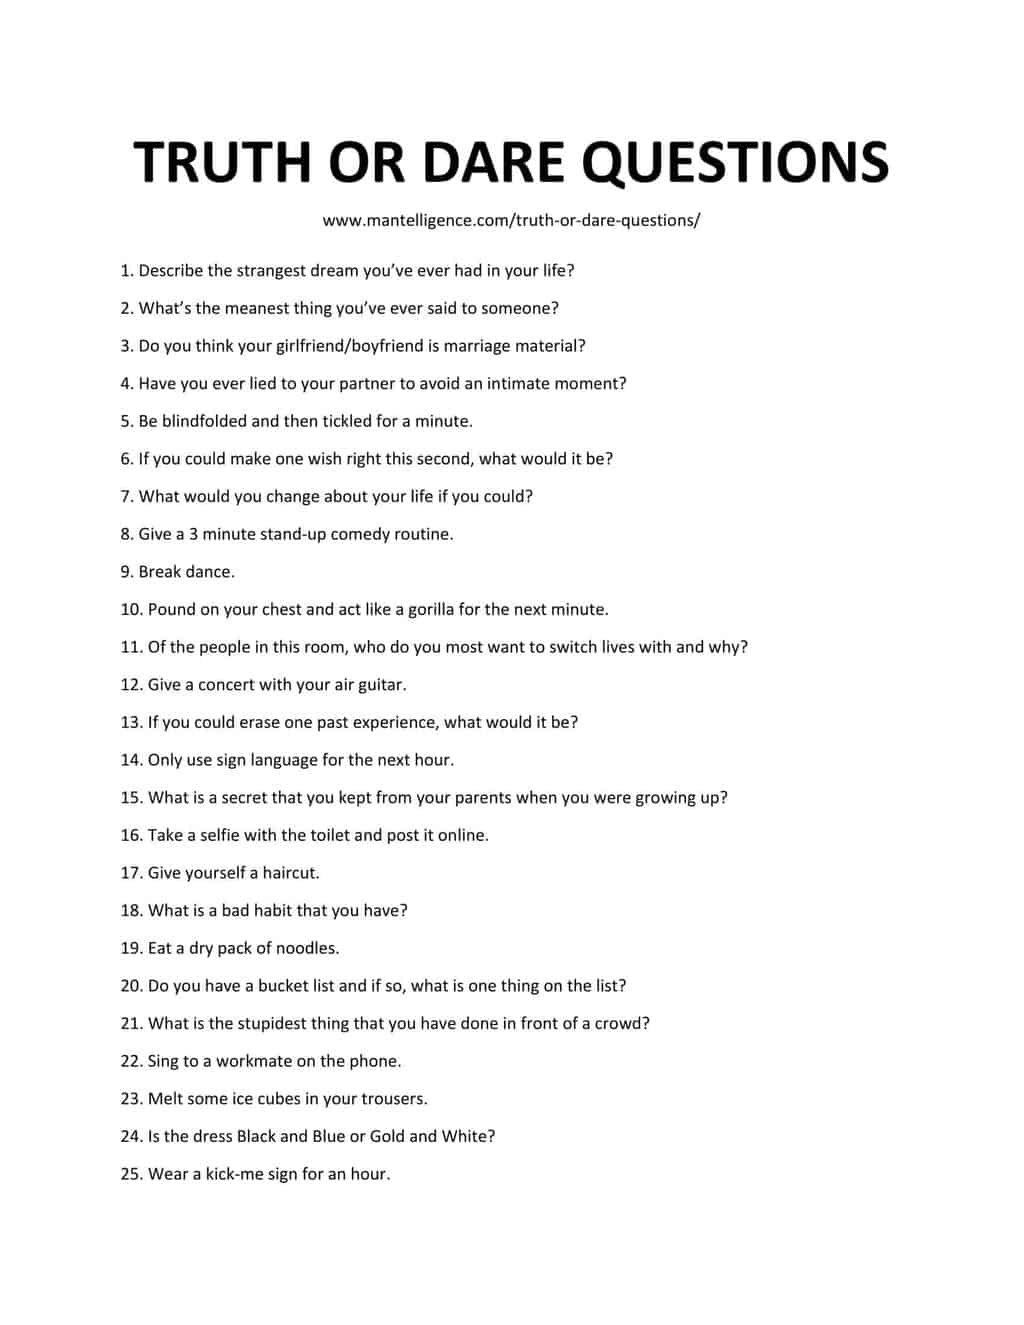 truth or dare sexual question